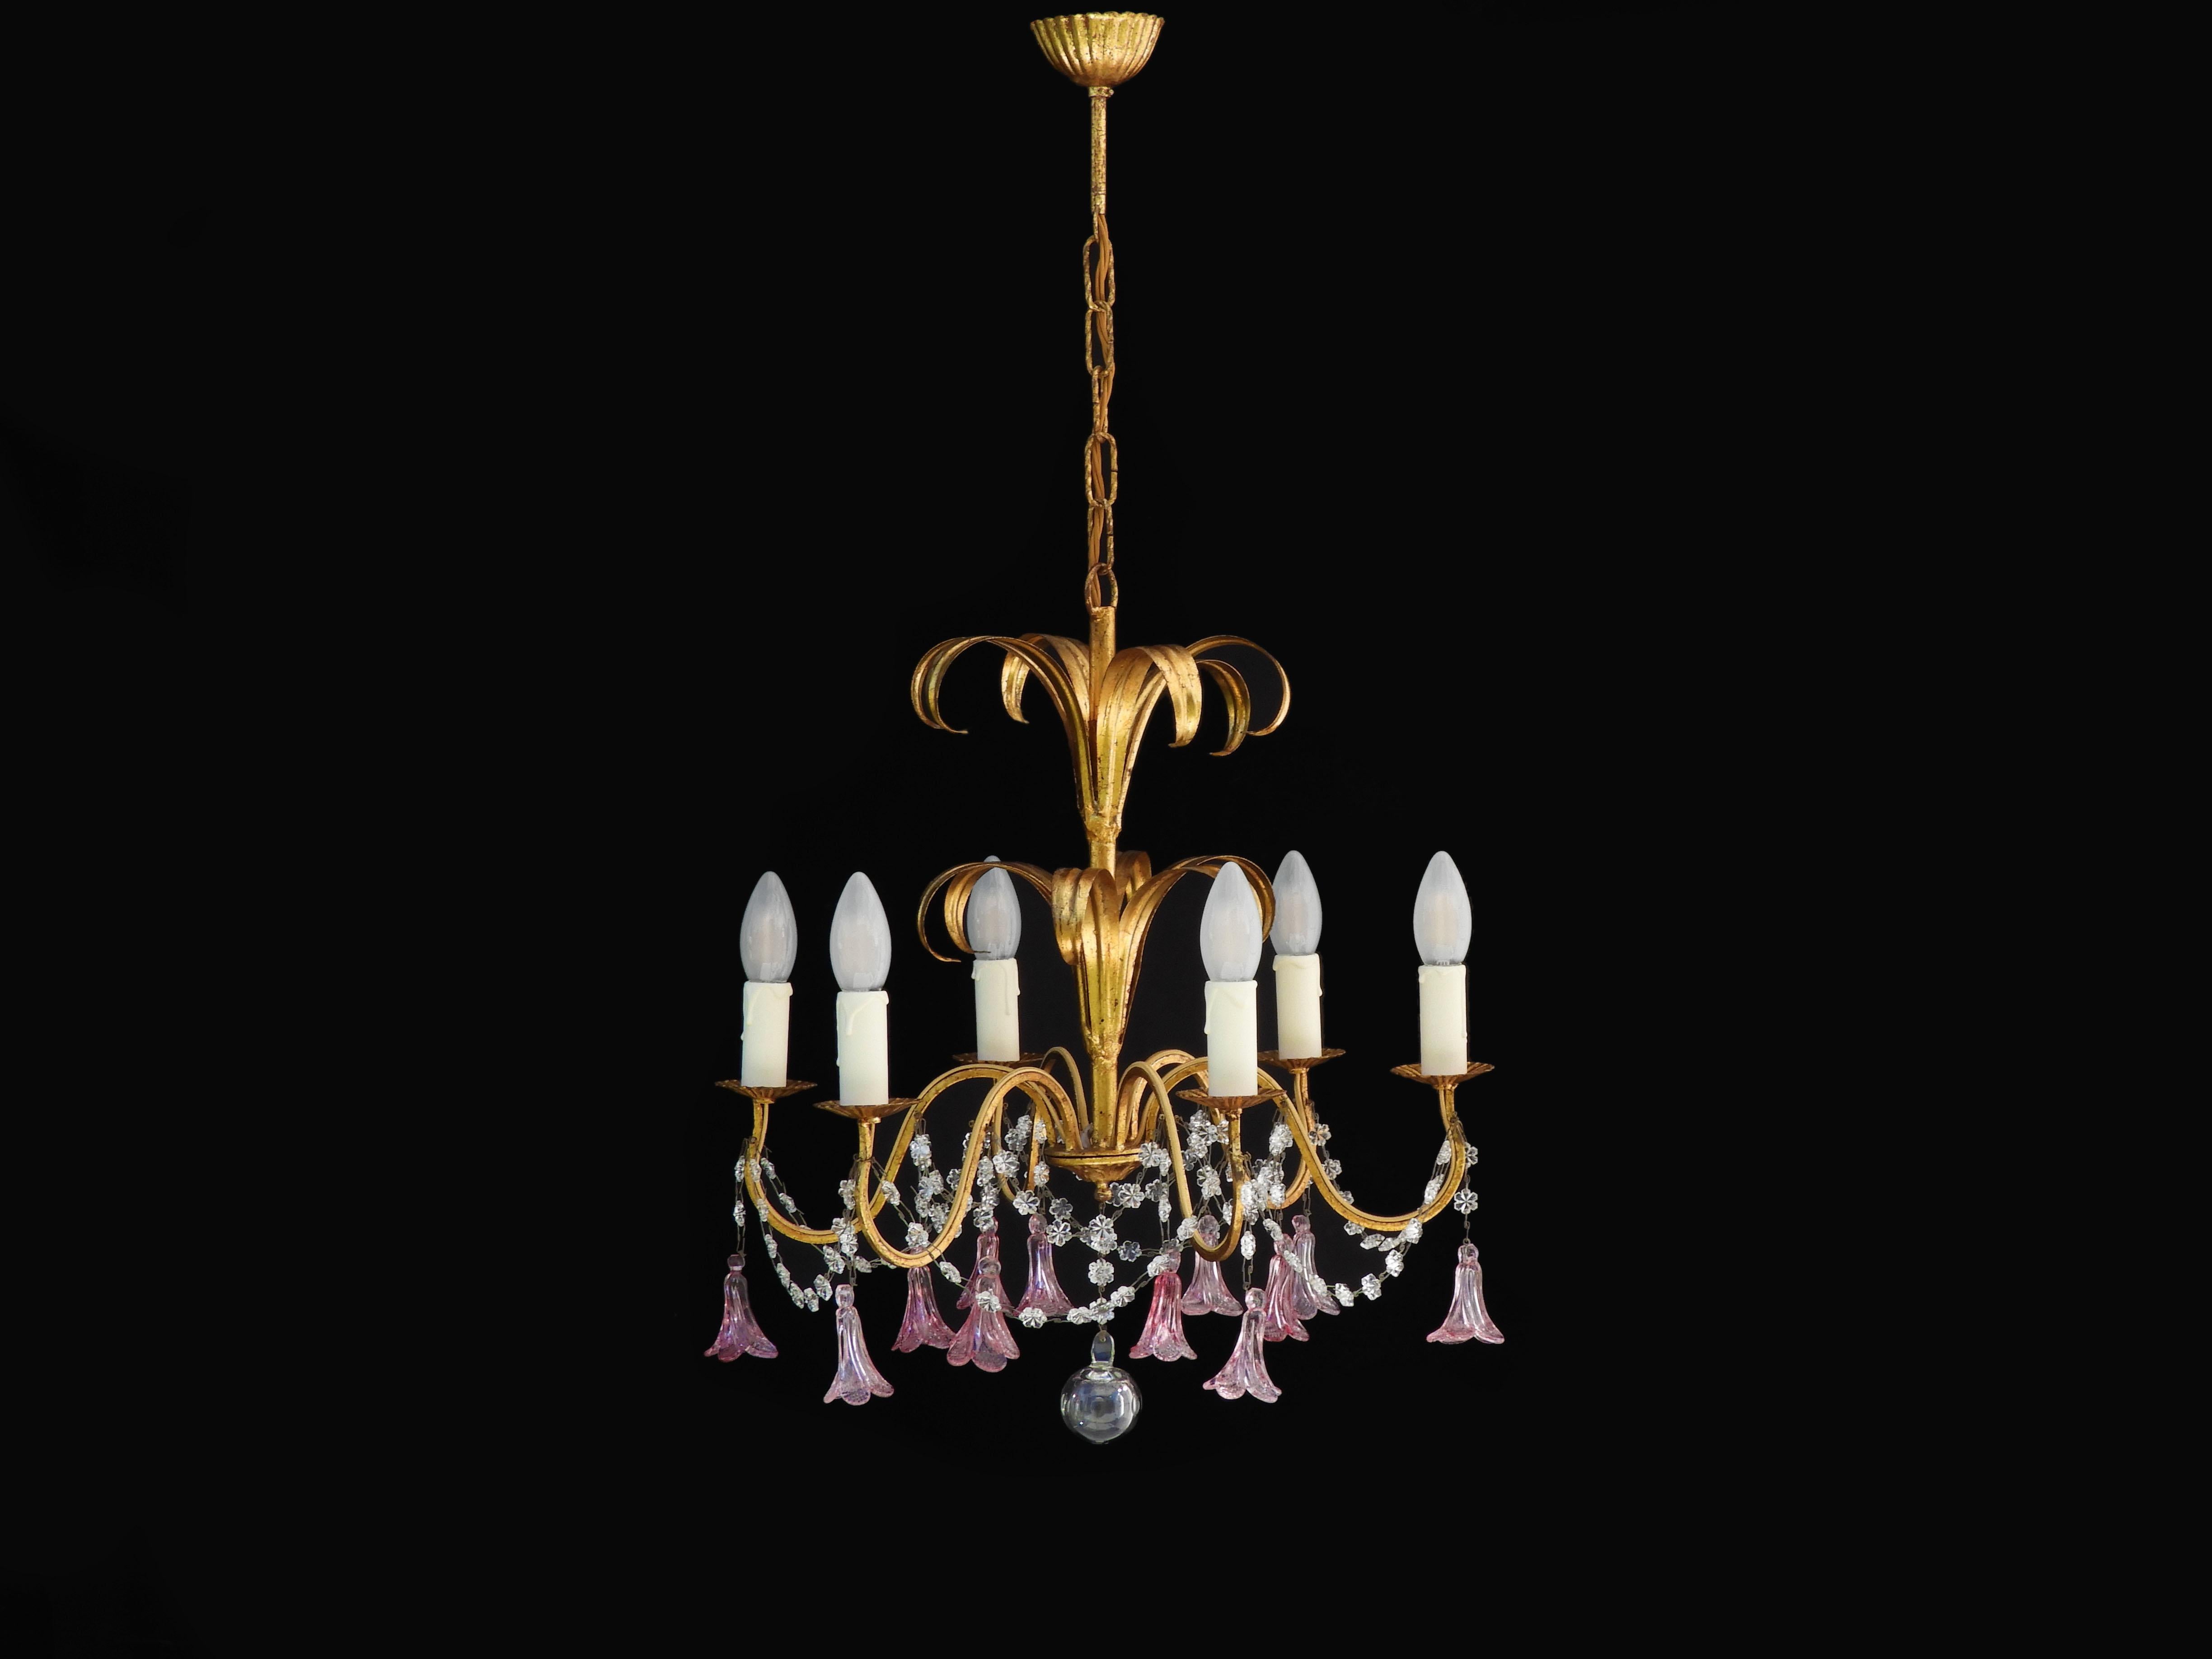 20th Century French 6 Light Chandelier C1950, Pink Flower Pendant Drops And Gilded Tôle